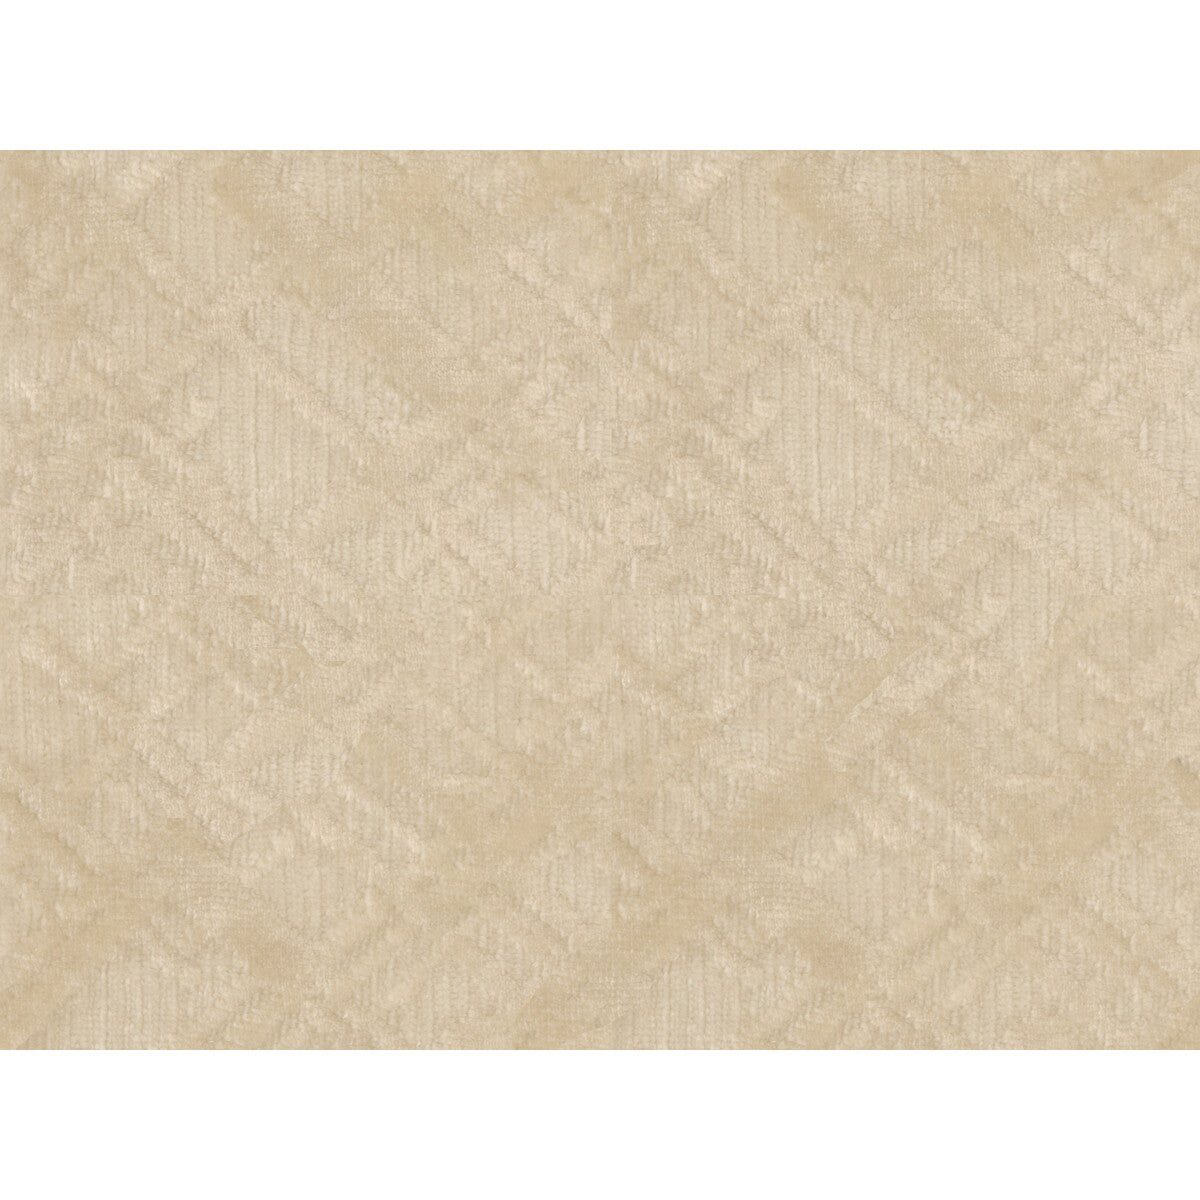 Cross The Line fabric in pearl color - pattern 34333.1.0 - by Kravet Couture